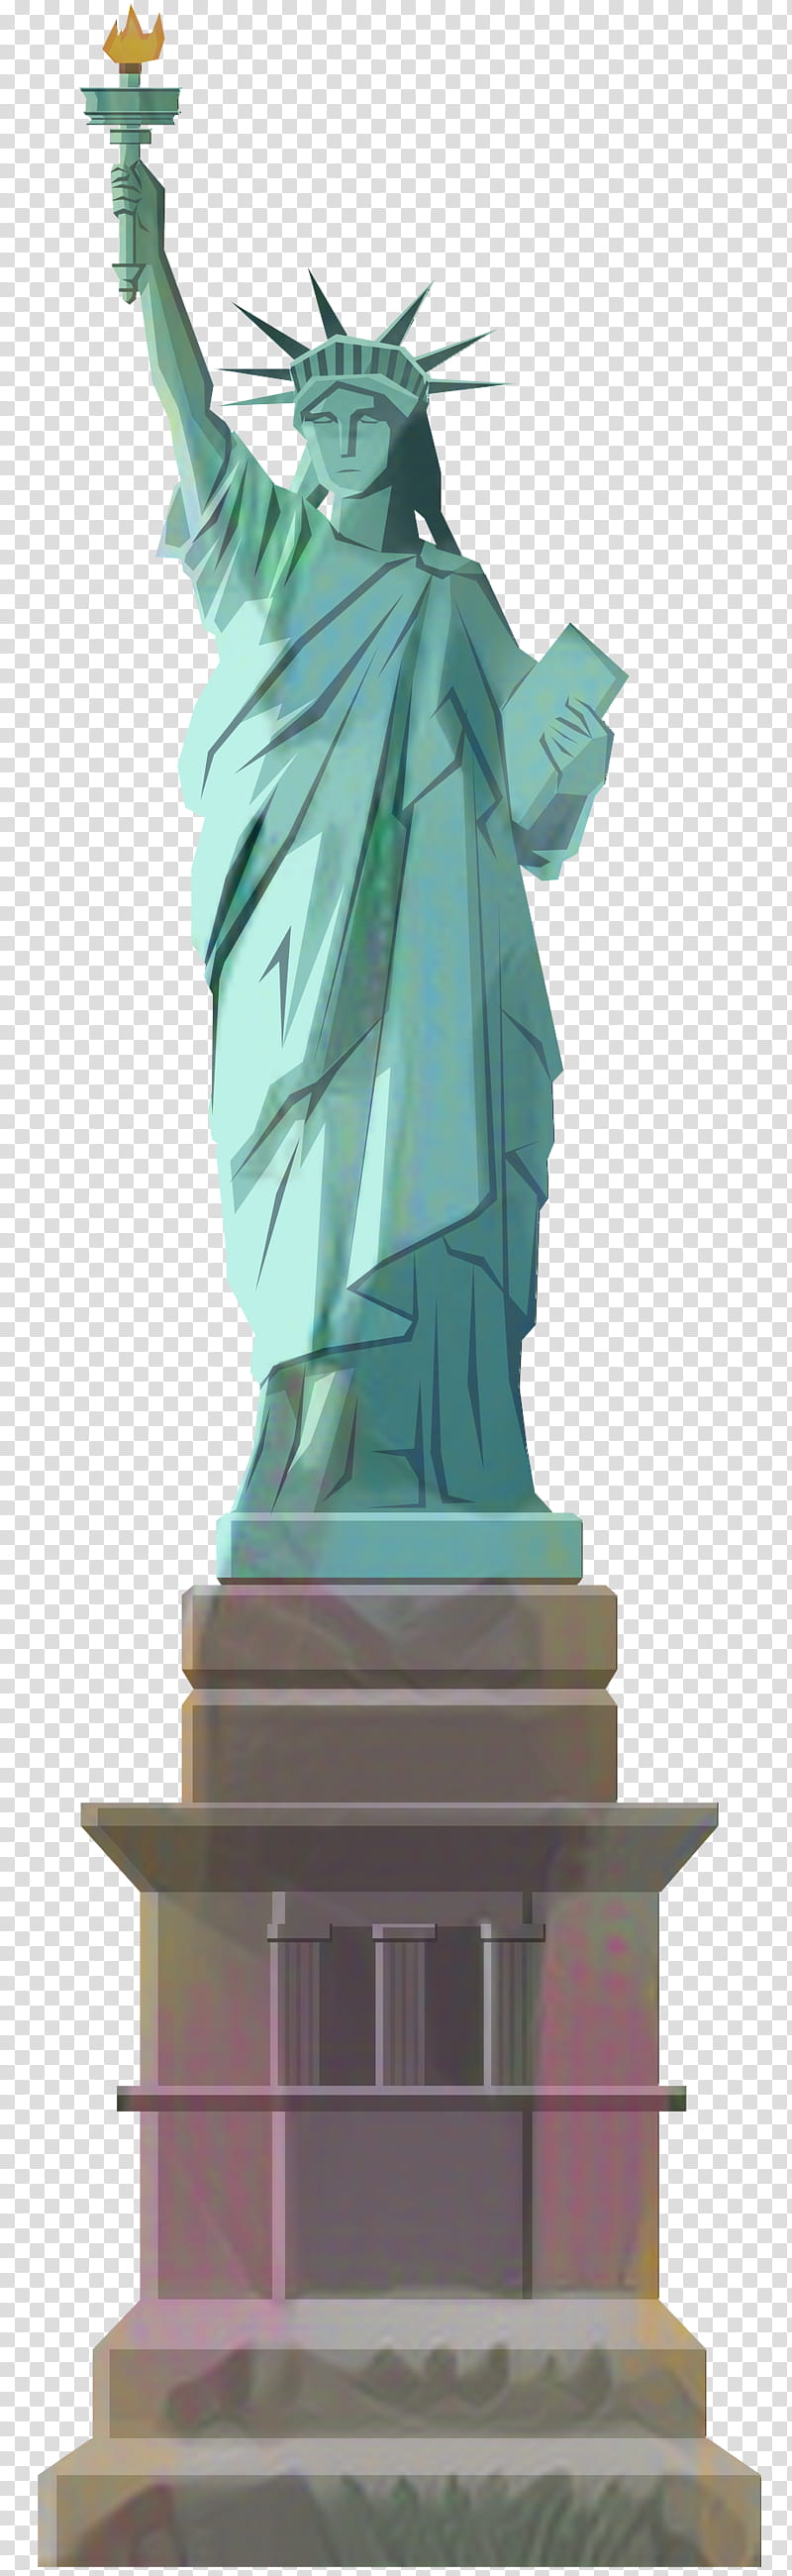 Statue Of Liberty, Statue Of Liberty National Monument, Sculpture, Drawing, Classical Sculpture, Art Museum, Cartoon, Figurine transparent background PNG clipart